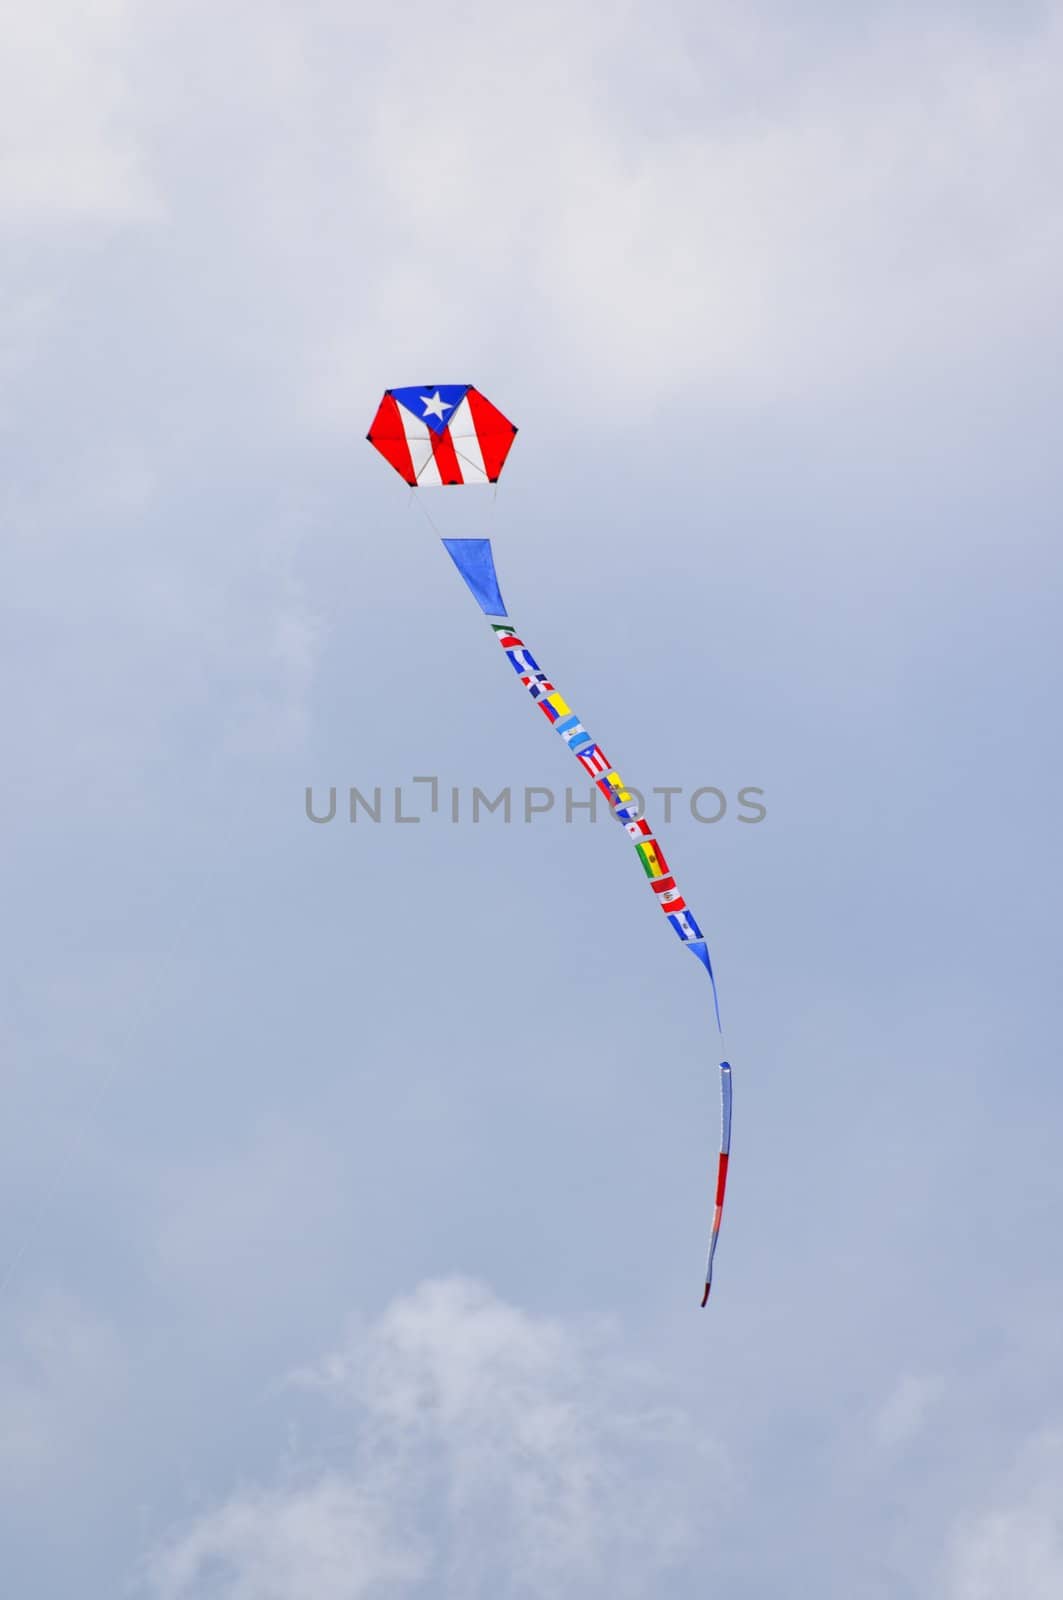 Airborne kite with Puerto Rican flag printed on body, and flags of other Latin American countries forming a long tail.